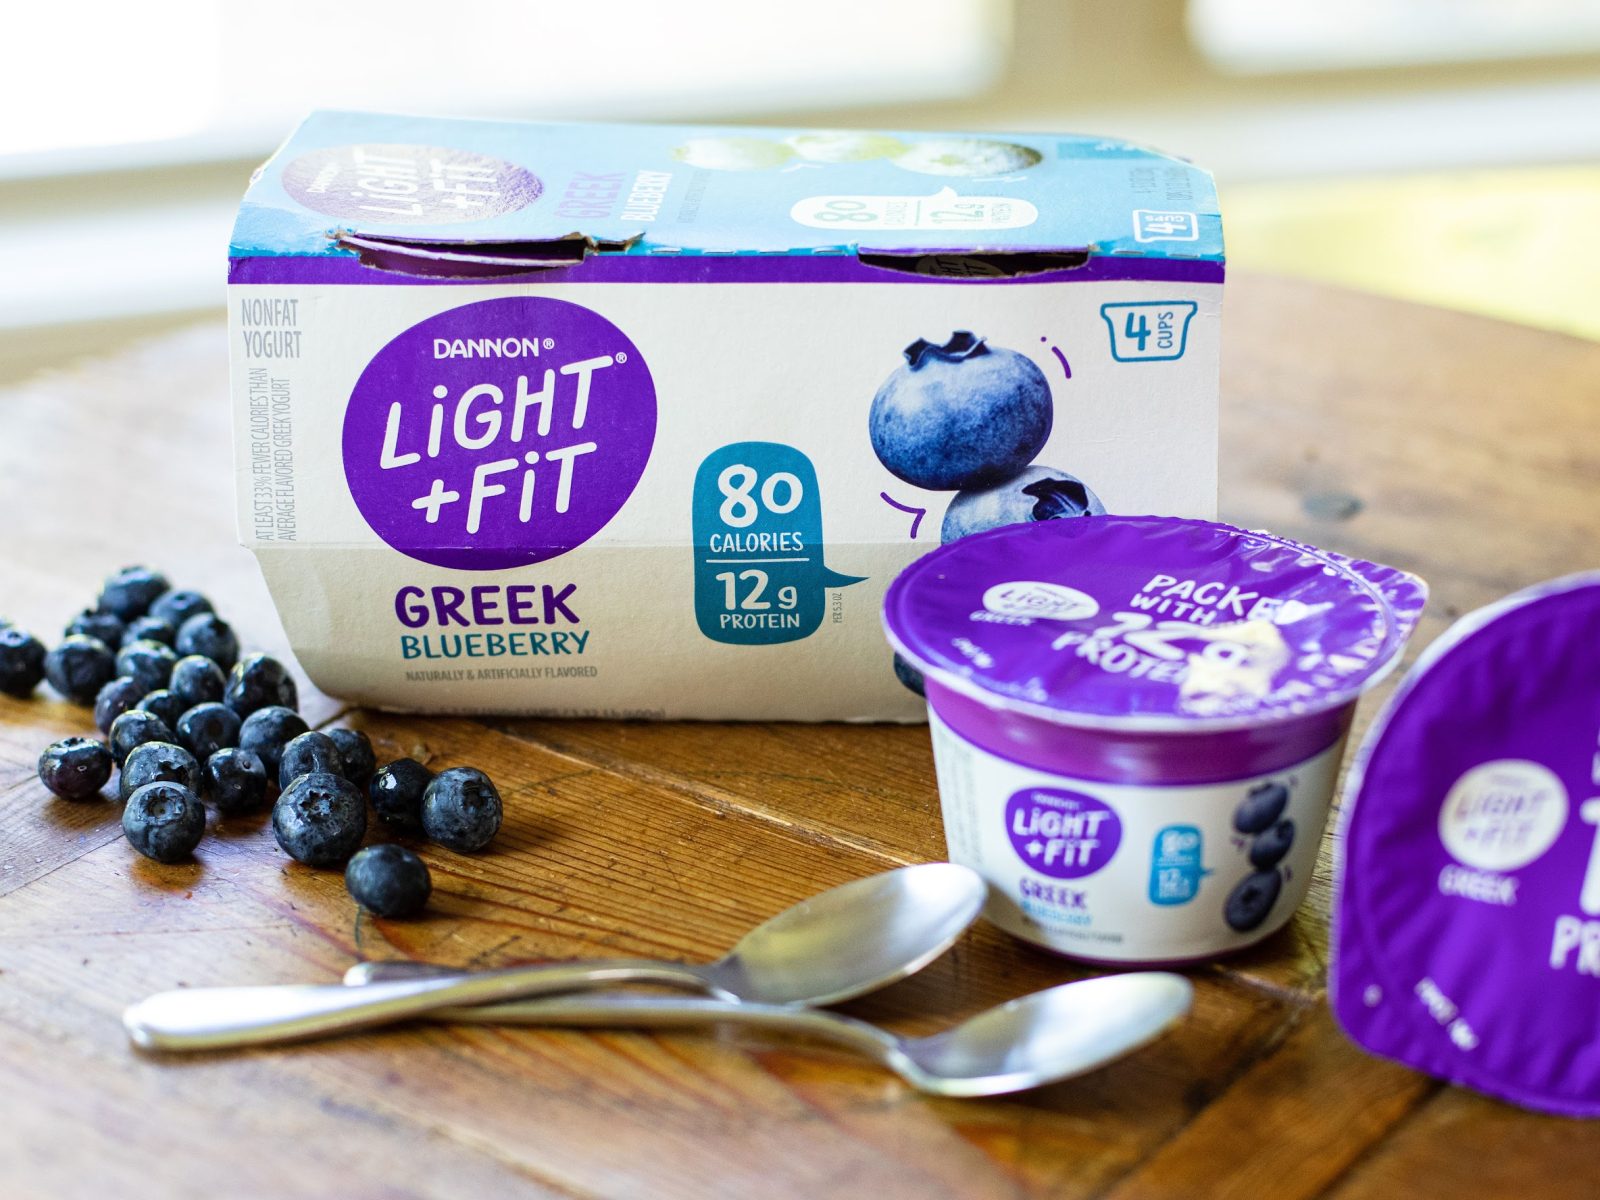 Still Time For Savings On Your Favorite Dannon Light & Fit 4-Pack At Publix